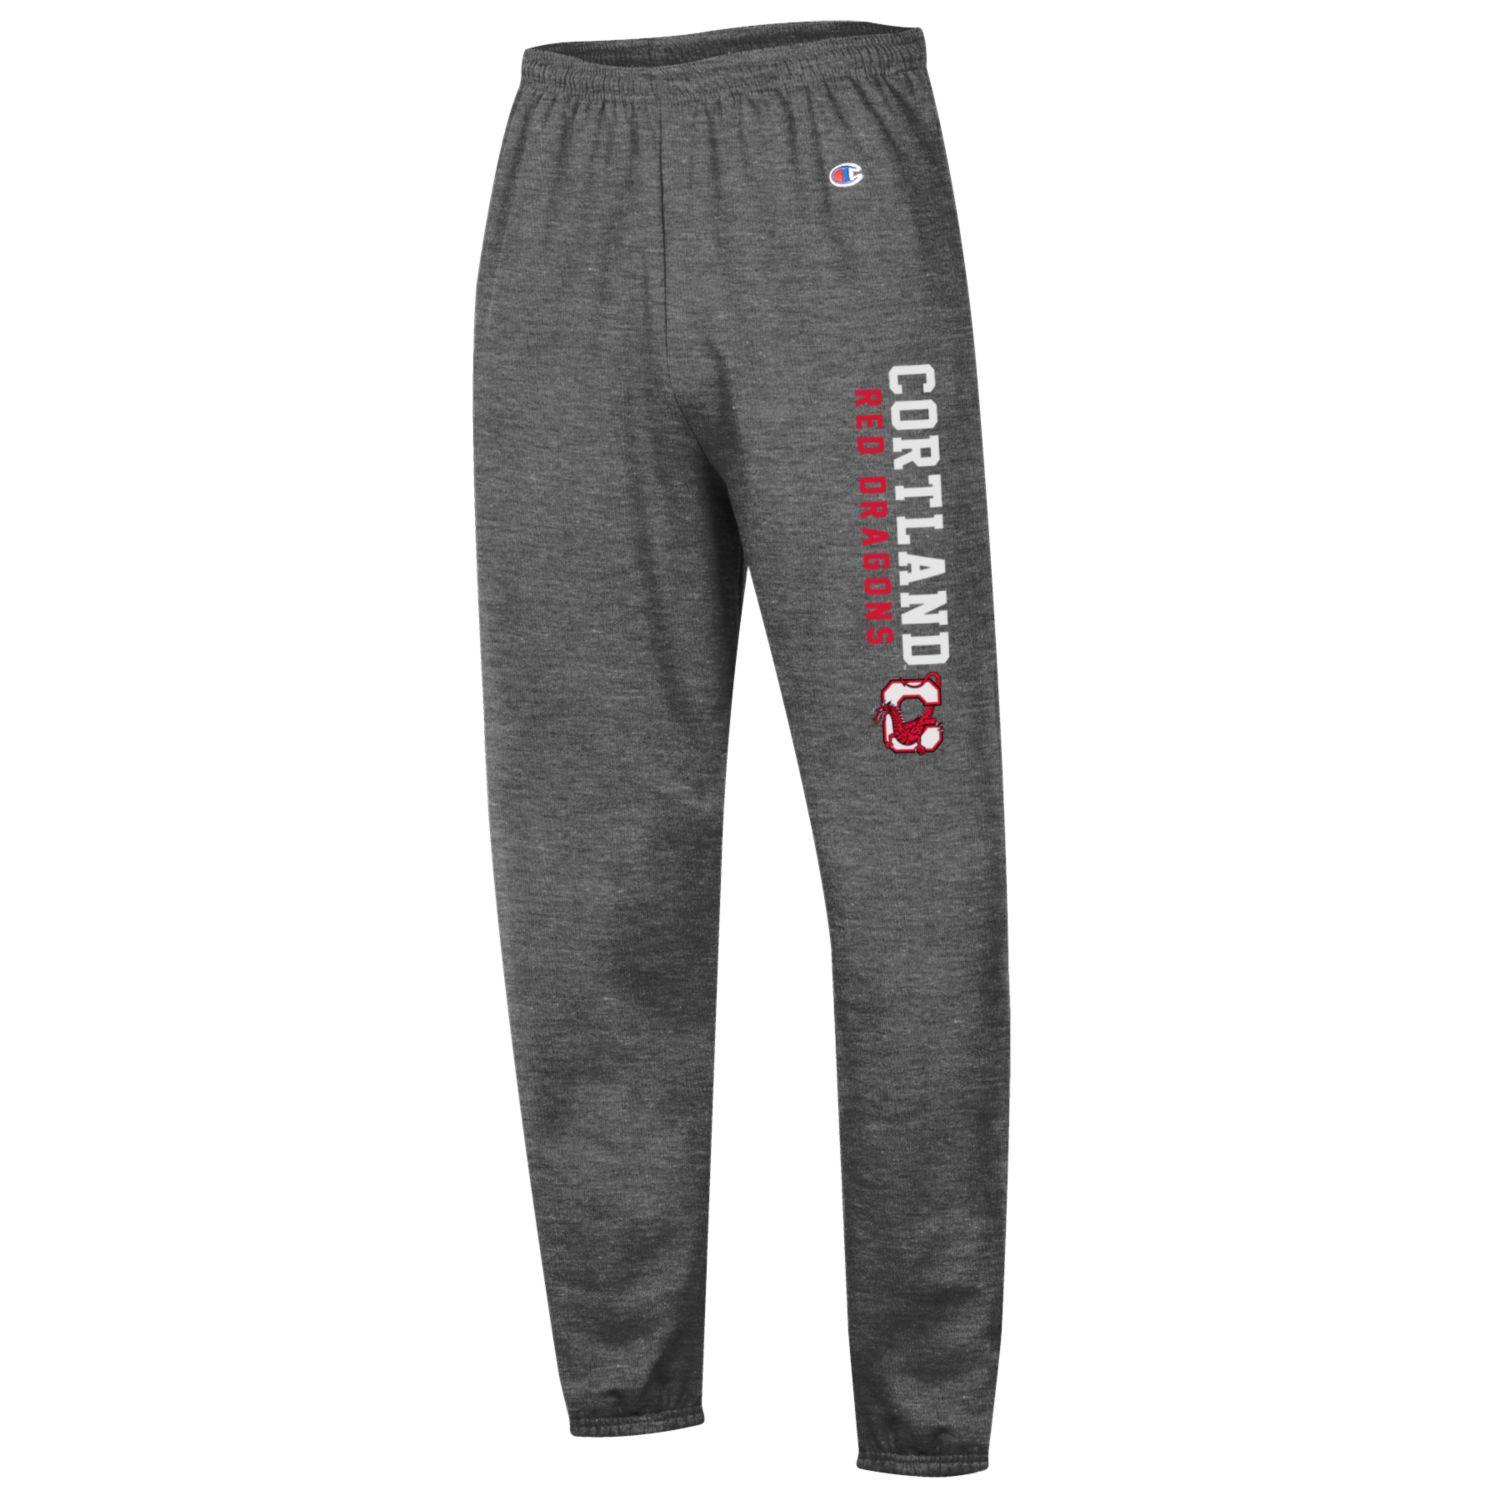 Pants | The Campus Store